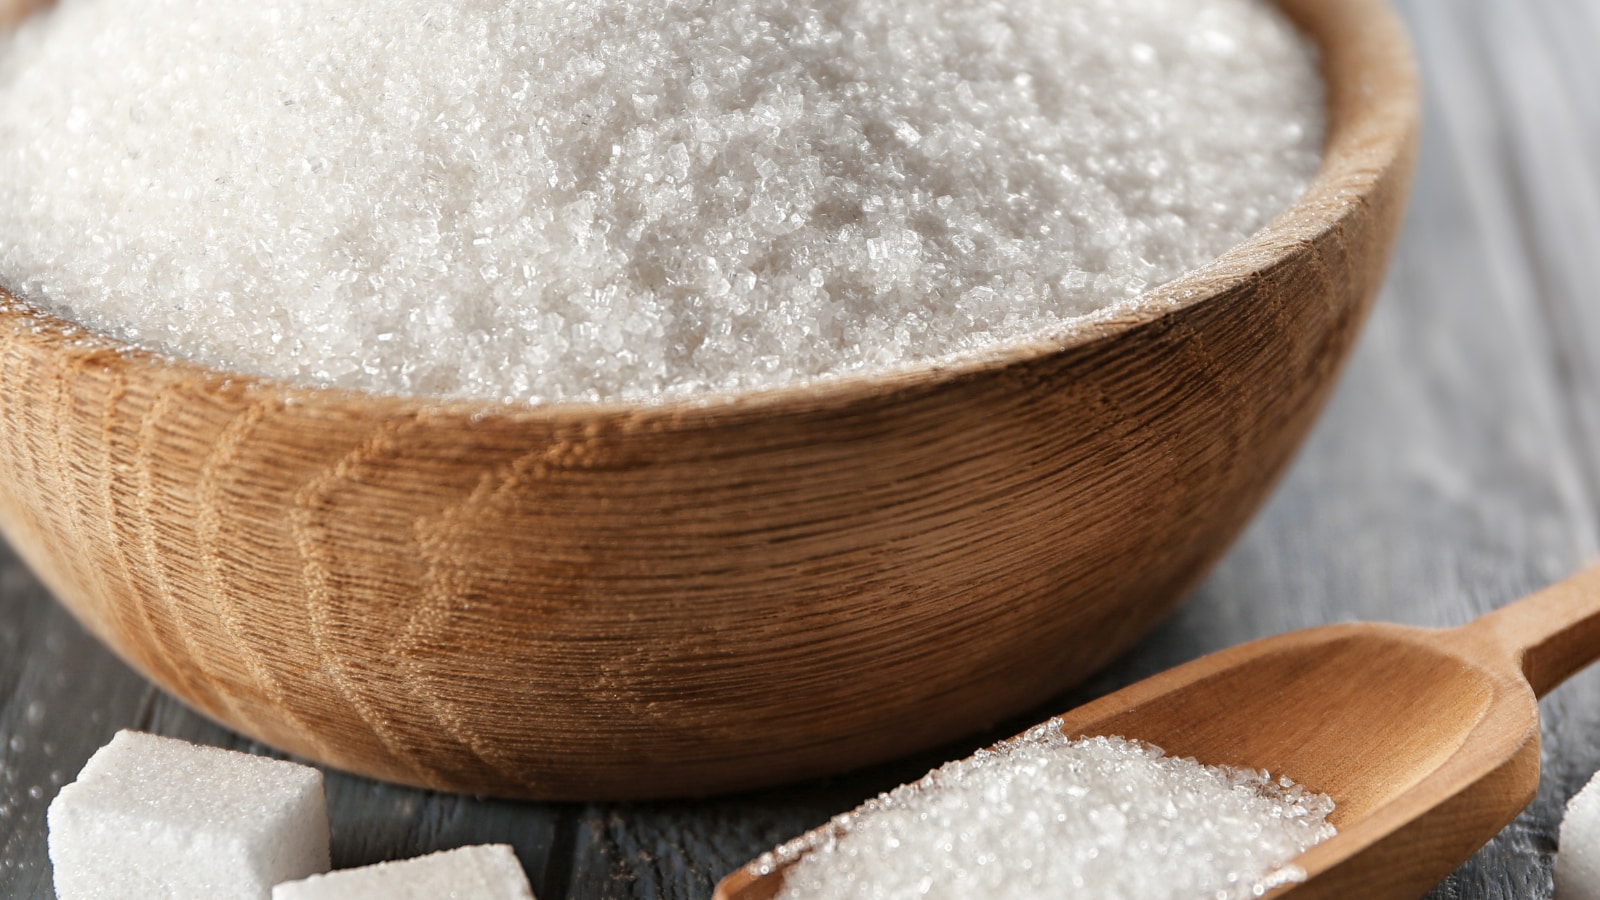 sugar-export-ban-govt-extends-restriction-by-1-year-till-october-2023-check-details